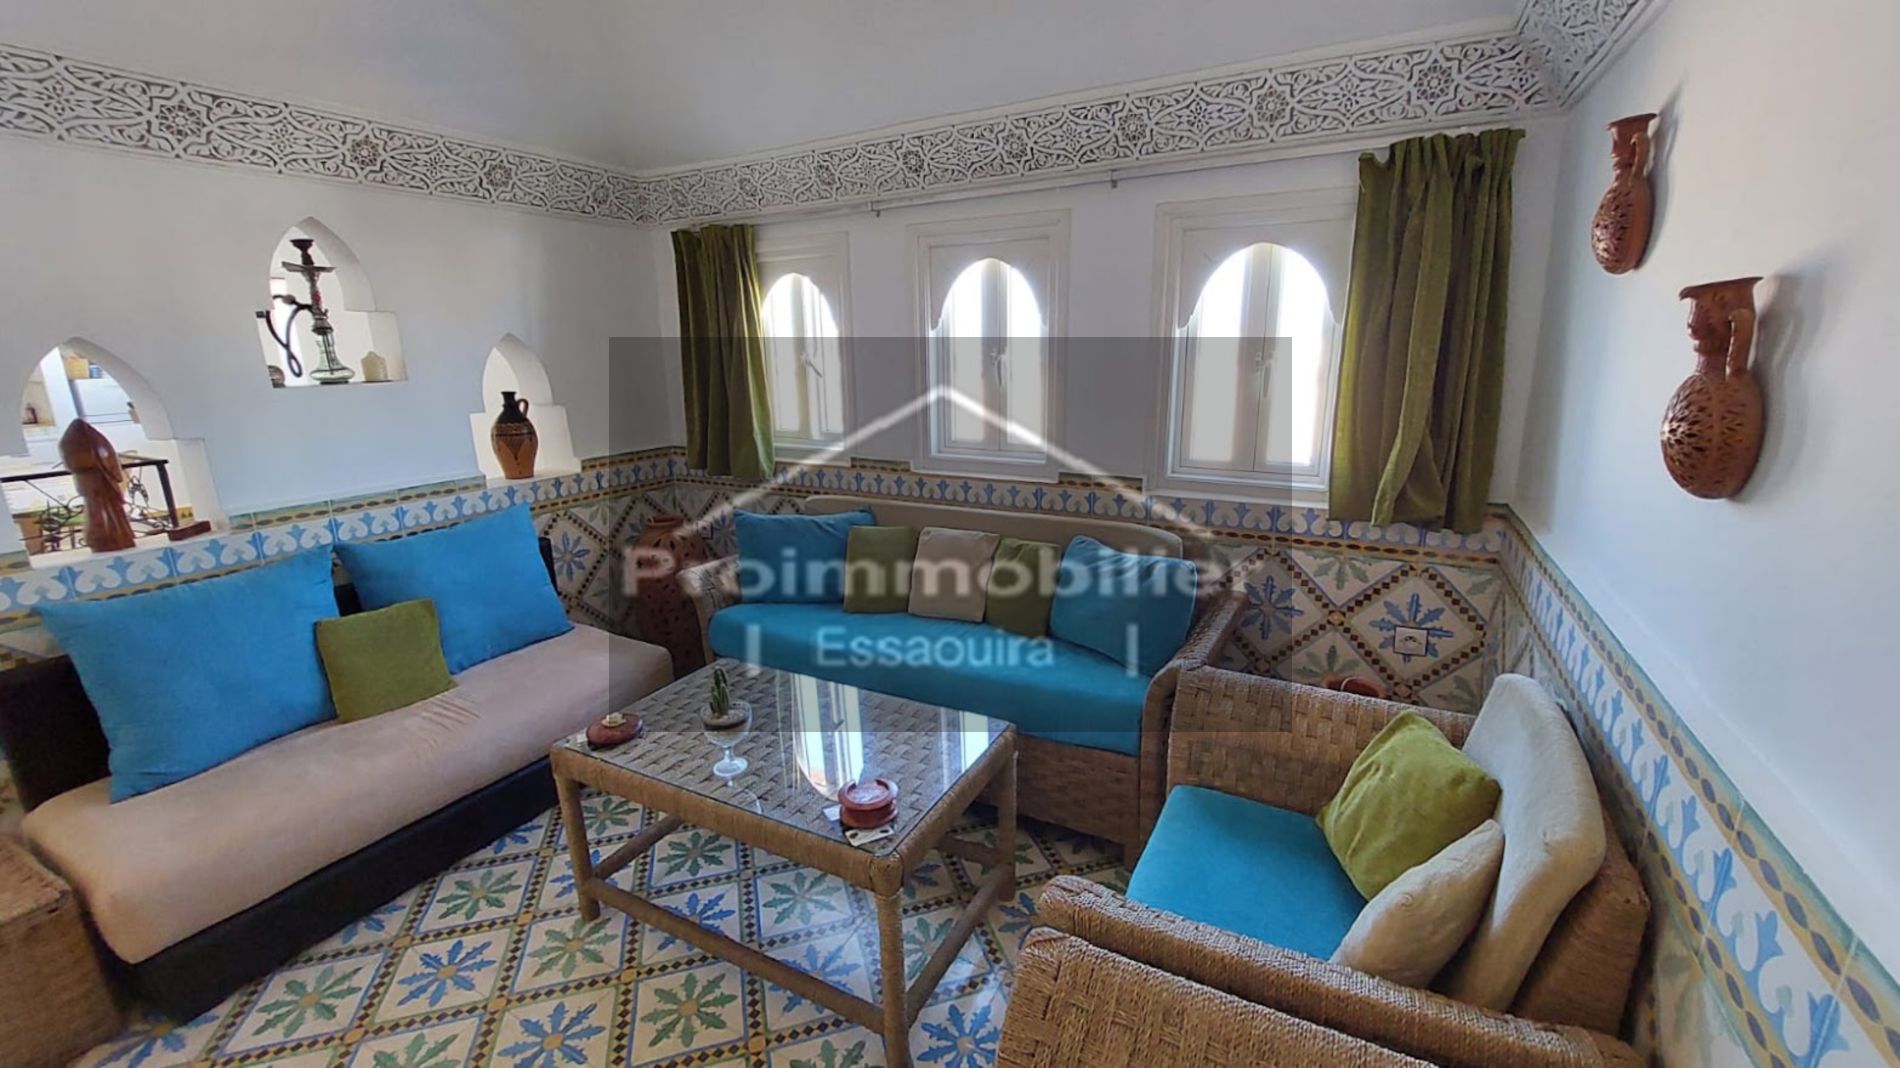 22-06-01-VA Beautiful Apartment of 100m² for sale in Essaouira with private Terrace